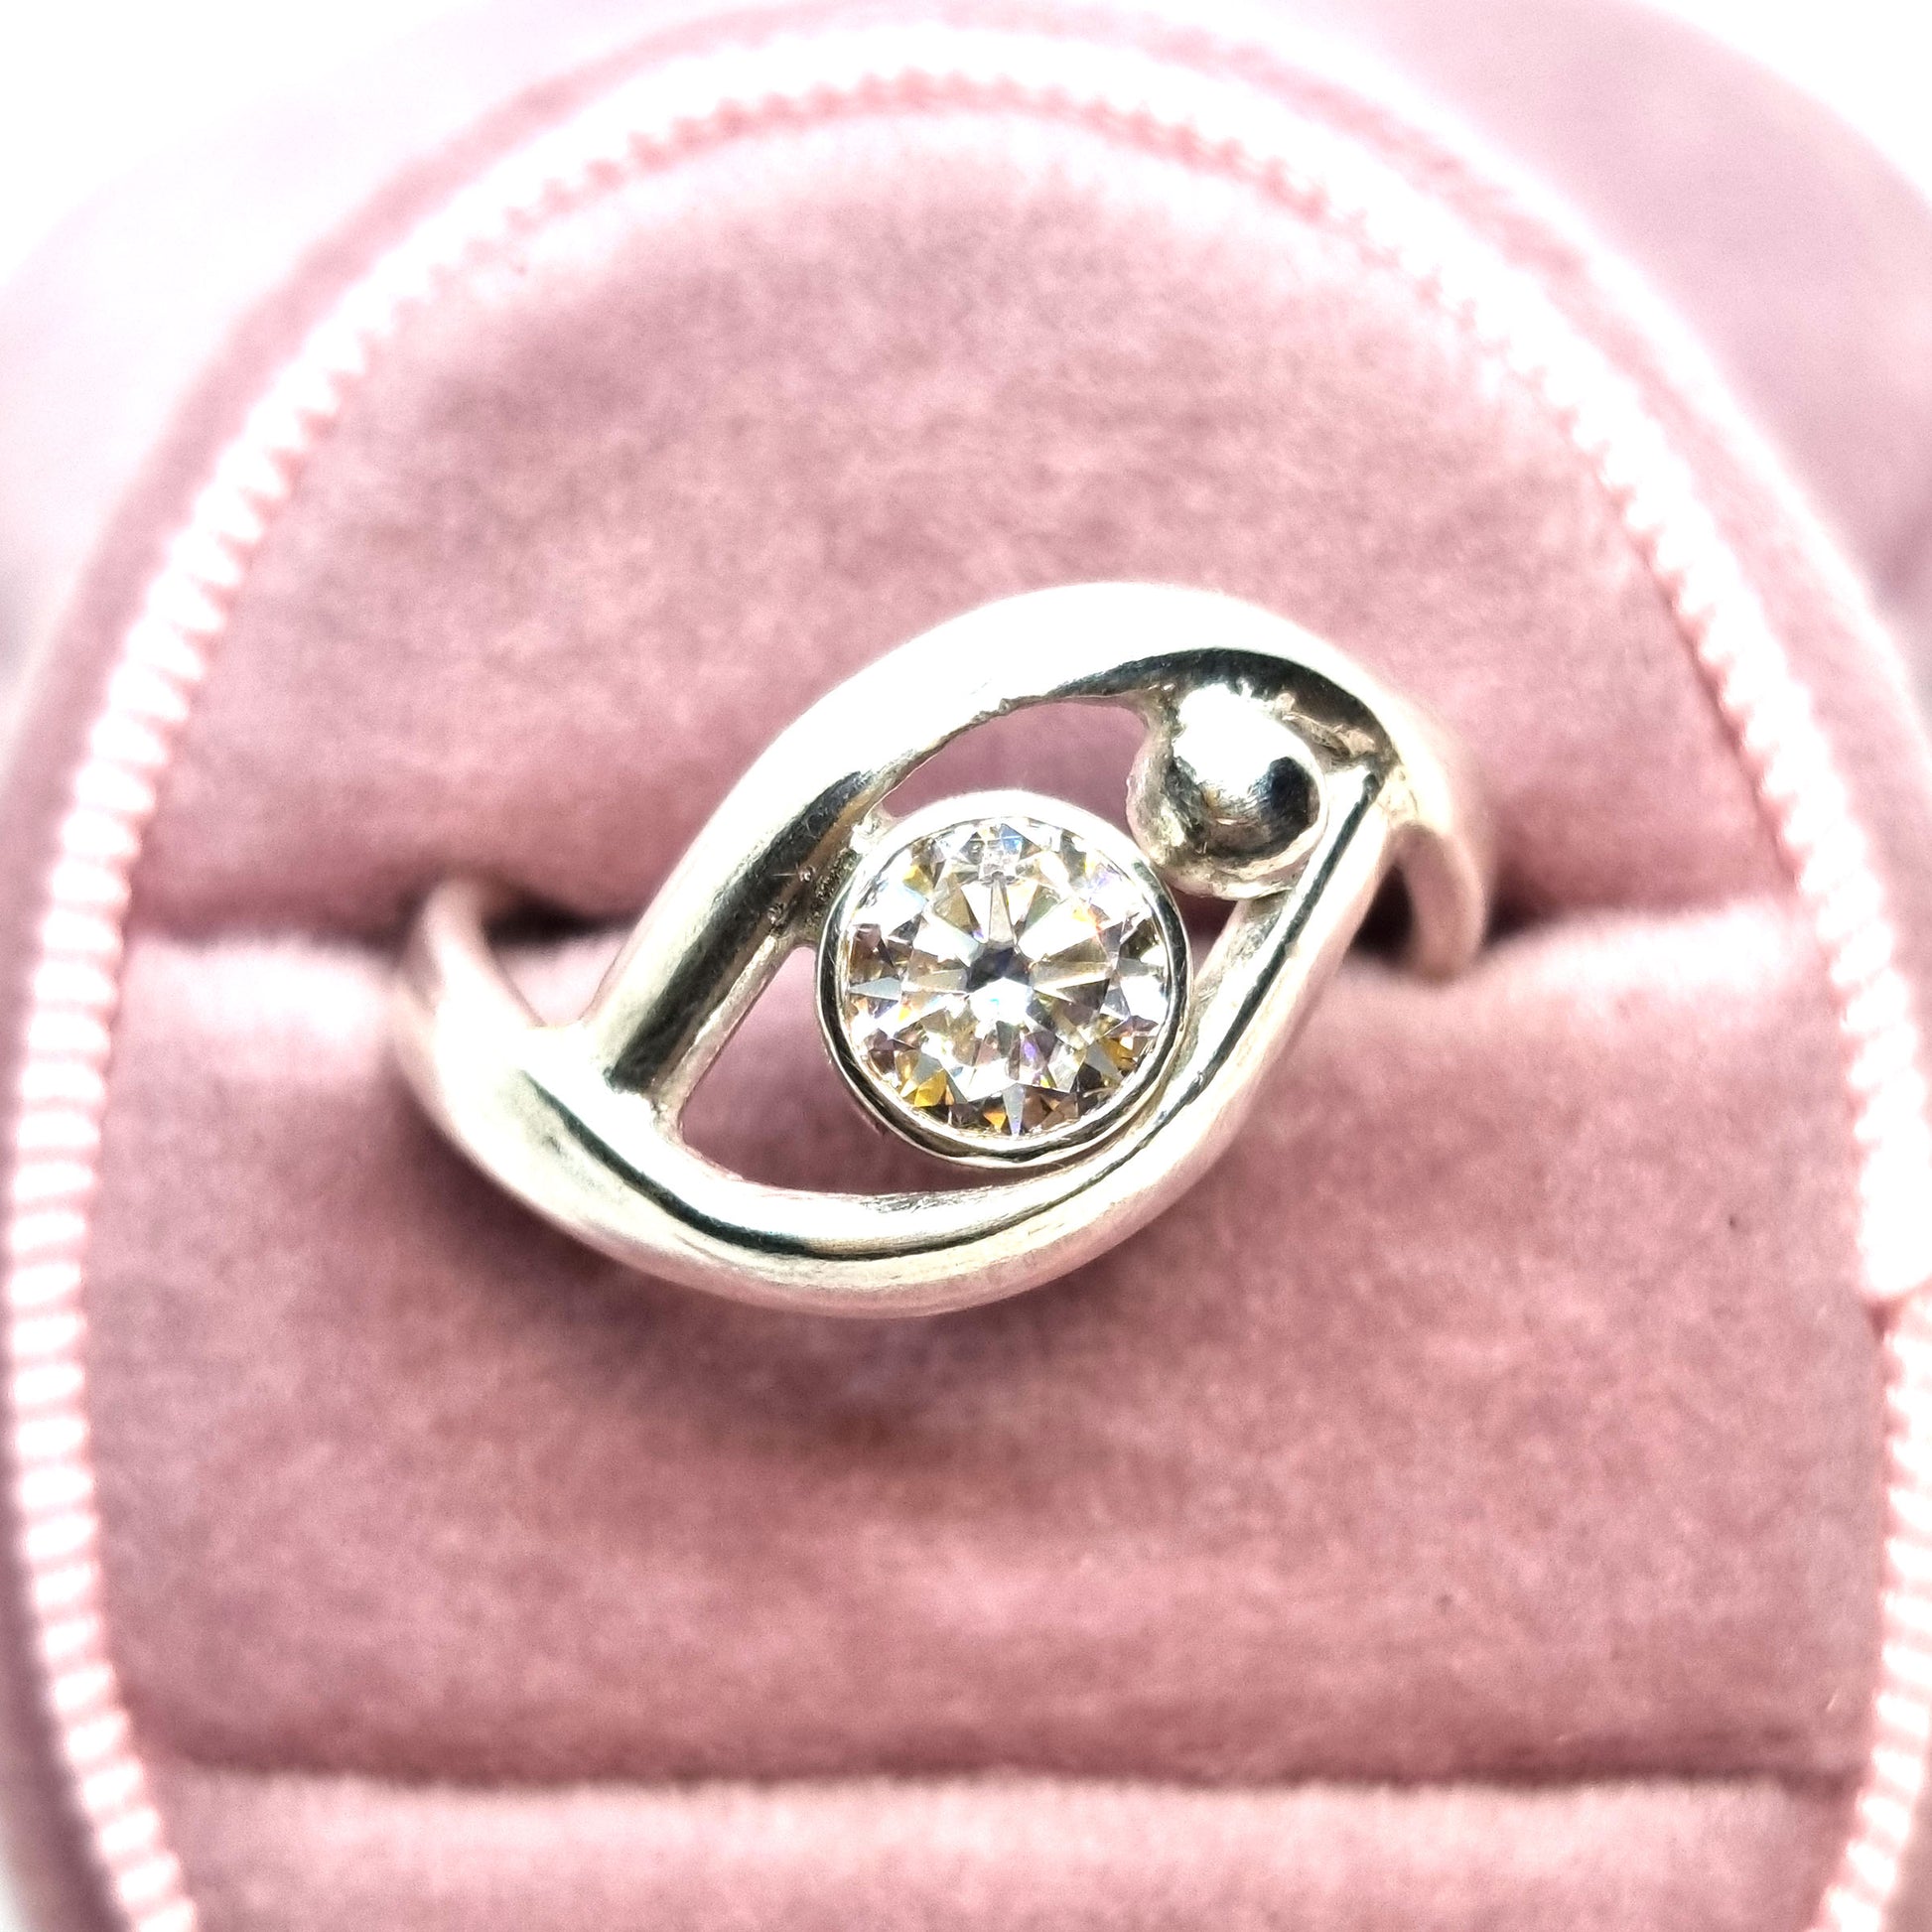 A silver ring with a central round faceted moissanite gemstone in a bezel setting. Next to the gemstone is a silver ball and the band of the ring wraps around both the ball and gemstone. Pictured in a pink jewellery box.